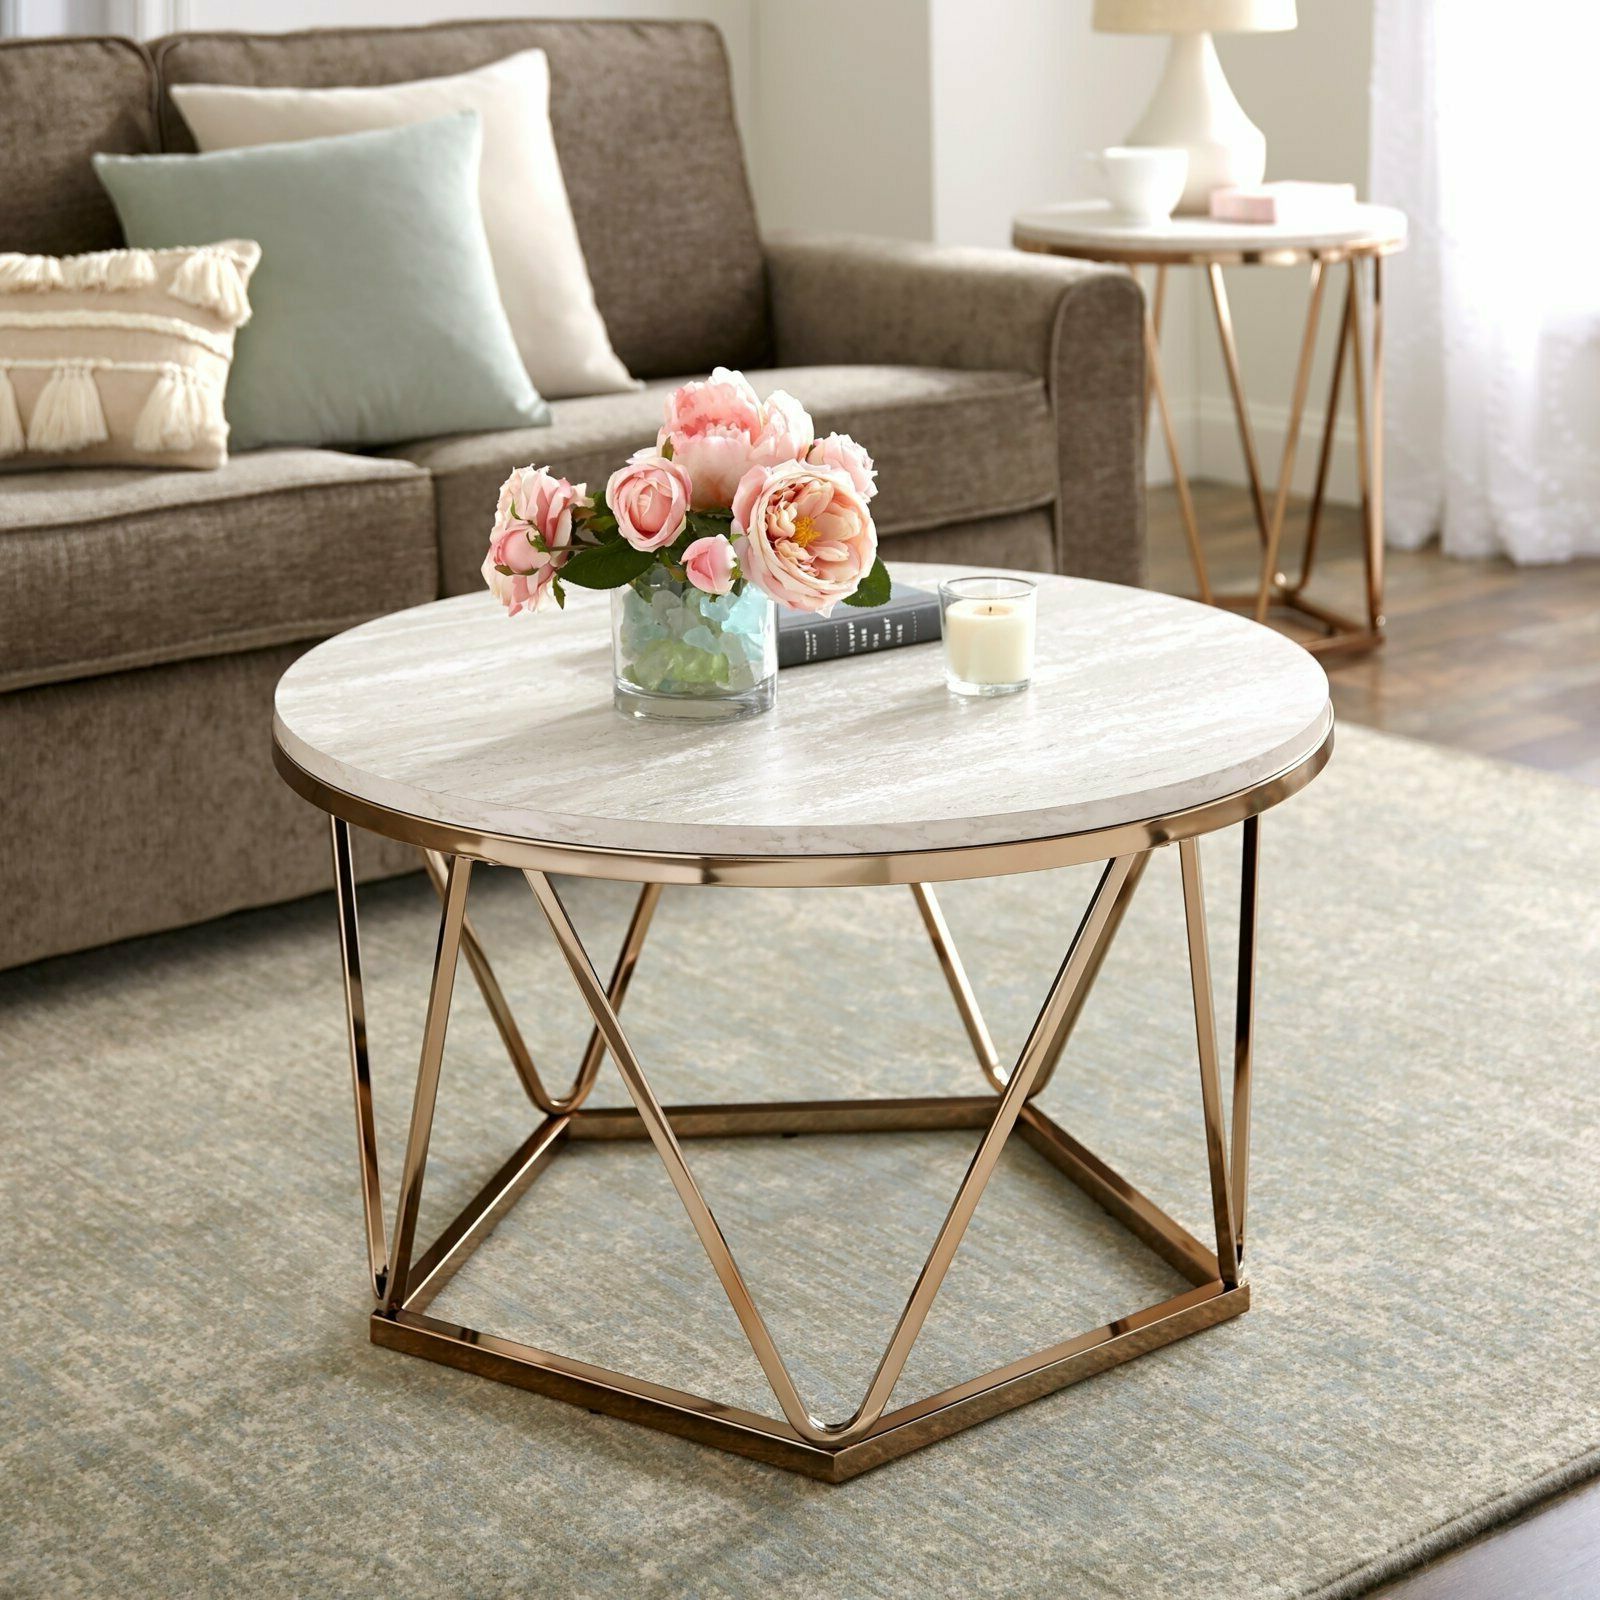 Details About Silver Orchid Henderson Faux Stone Goldtone Round Coffee Table In Well Known Silver Orchid Ipsen Contemporary Glass Top Coffee Tables (View 14 of 20)